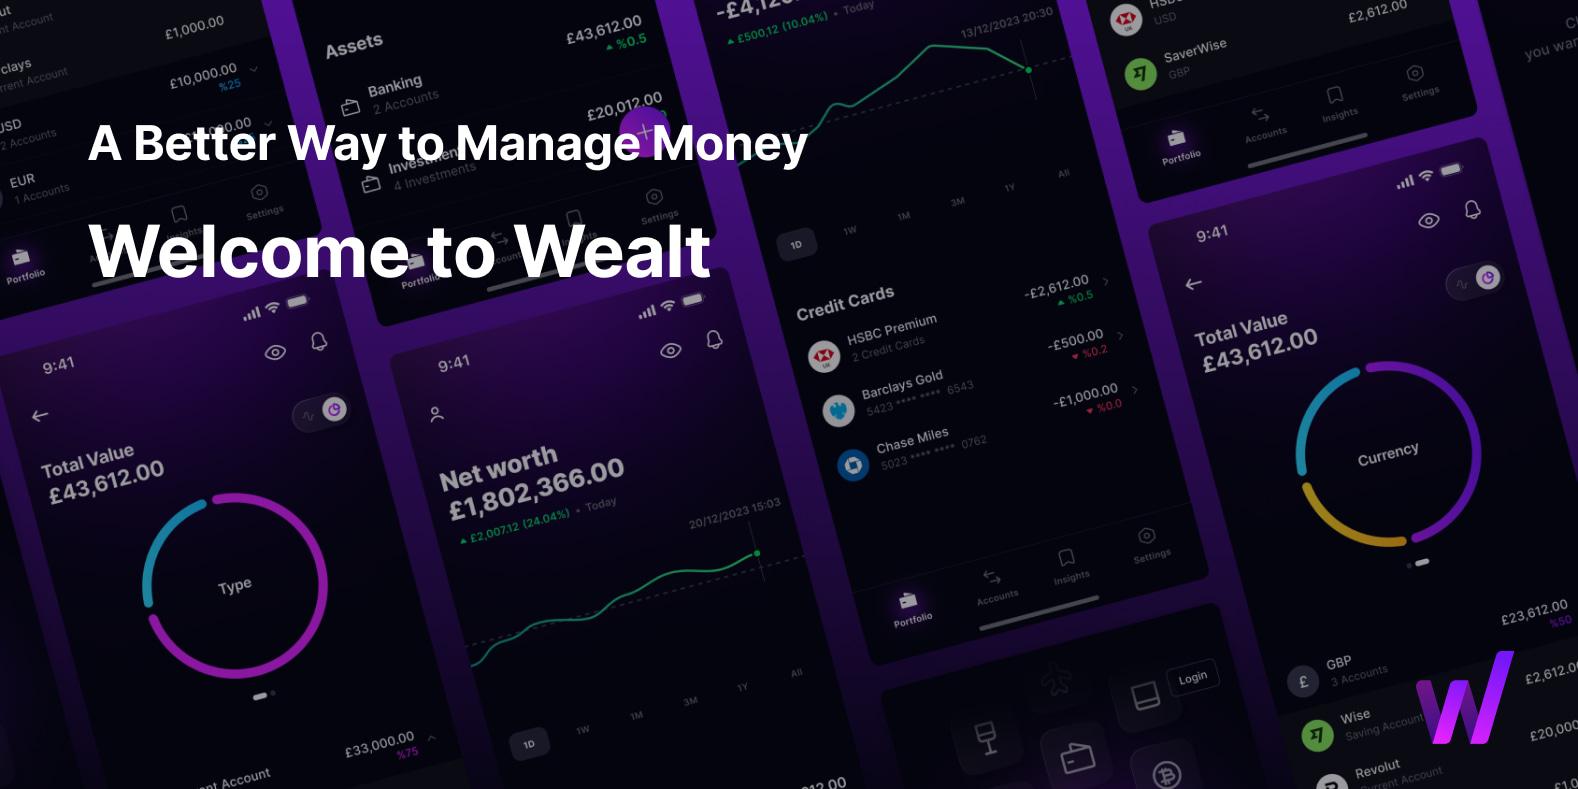 Welcome to wealt a better way to manage money and city landscape picture under that with purple color 